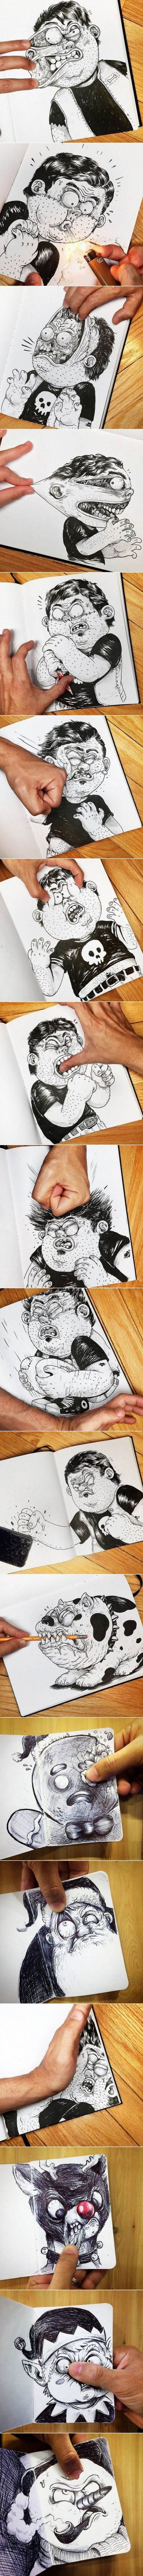 These Humoristic Drawings Are Fighting Their Creator